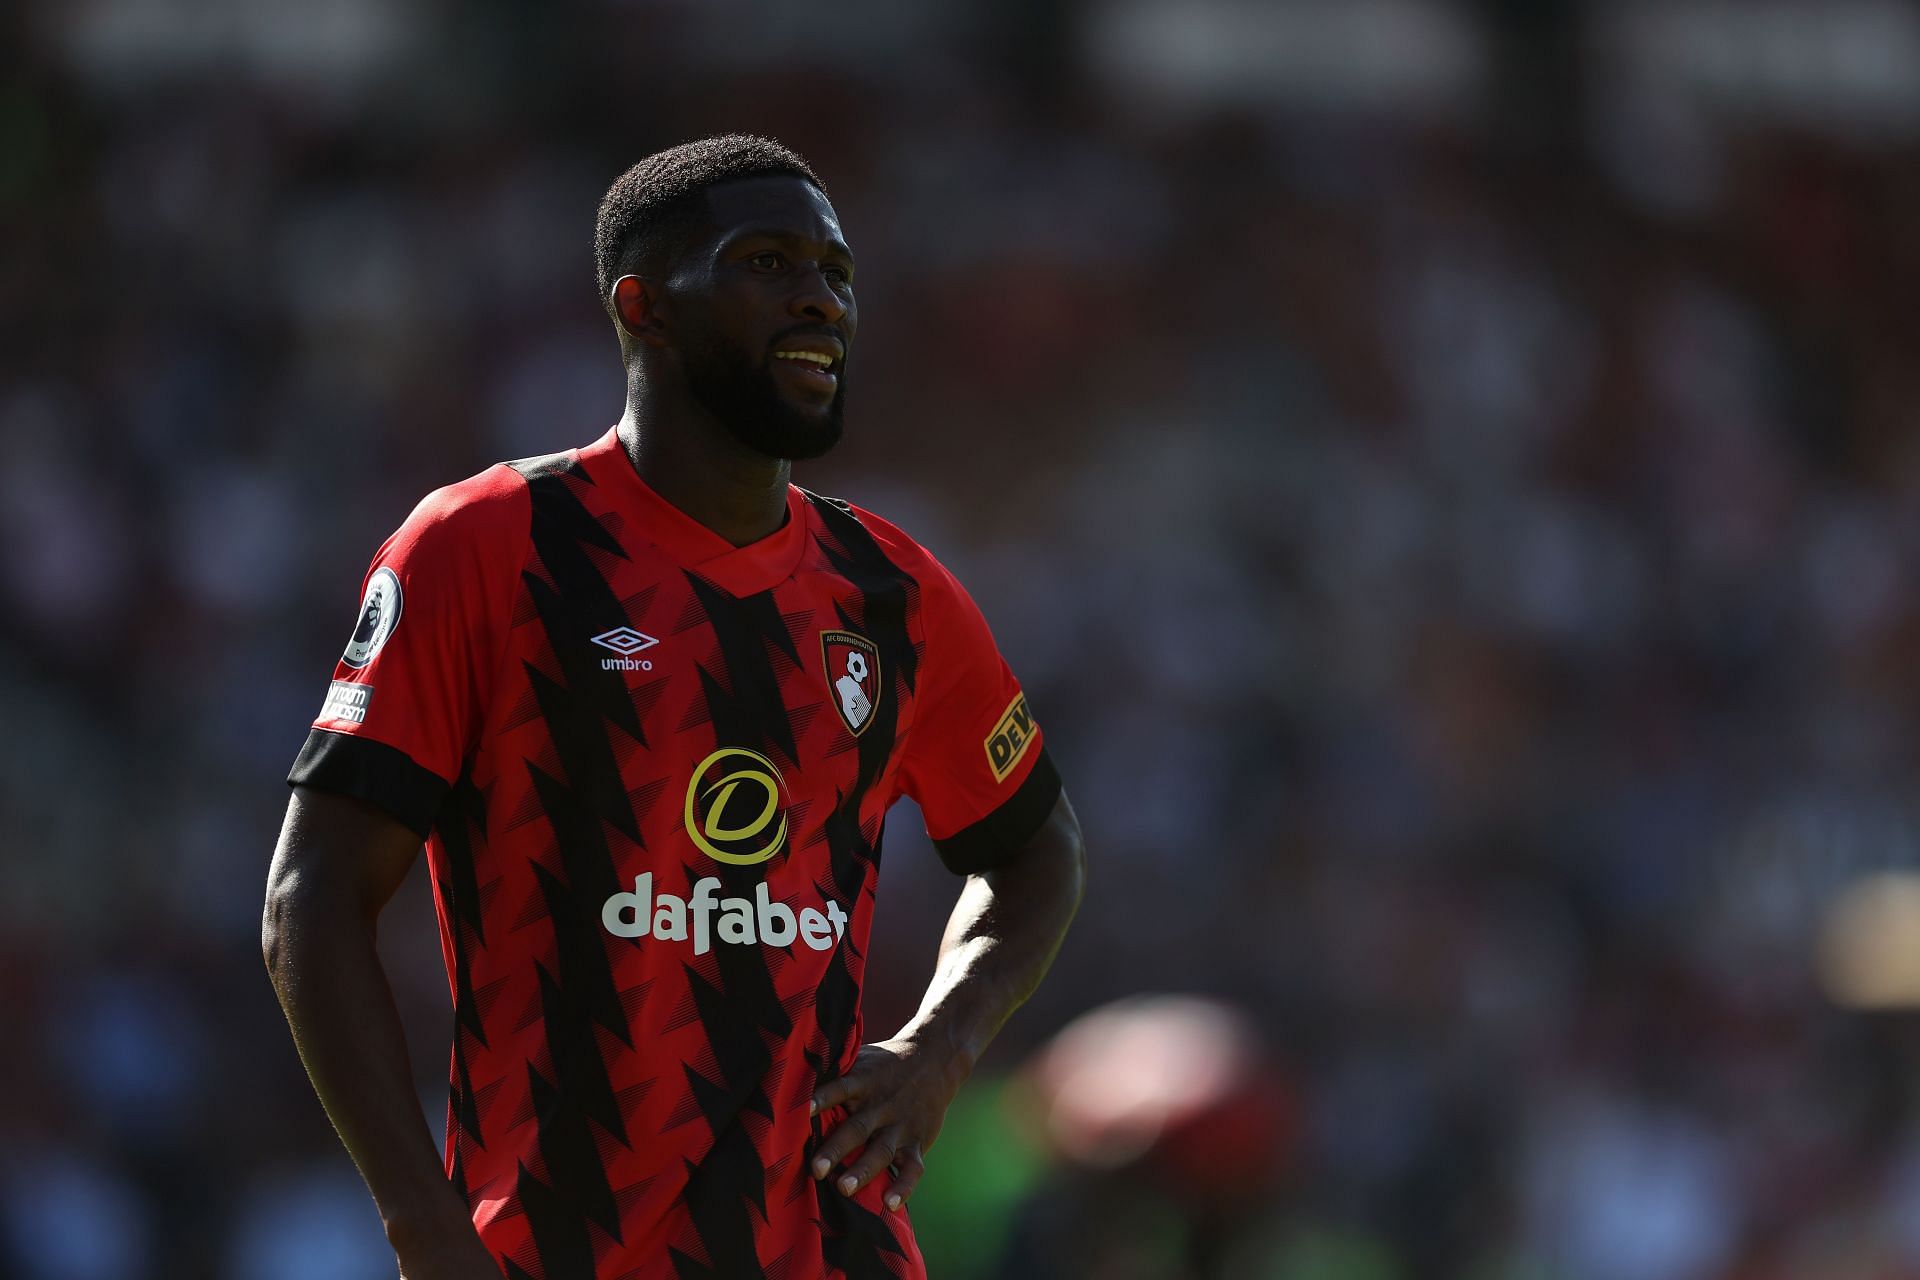 Bournemouth kicked off their season with a win against Aston Villa